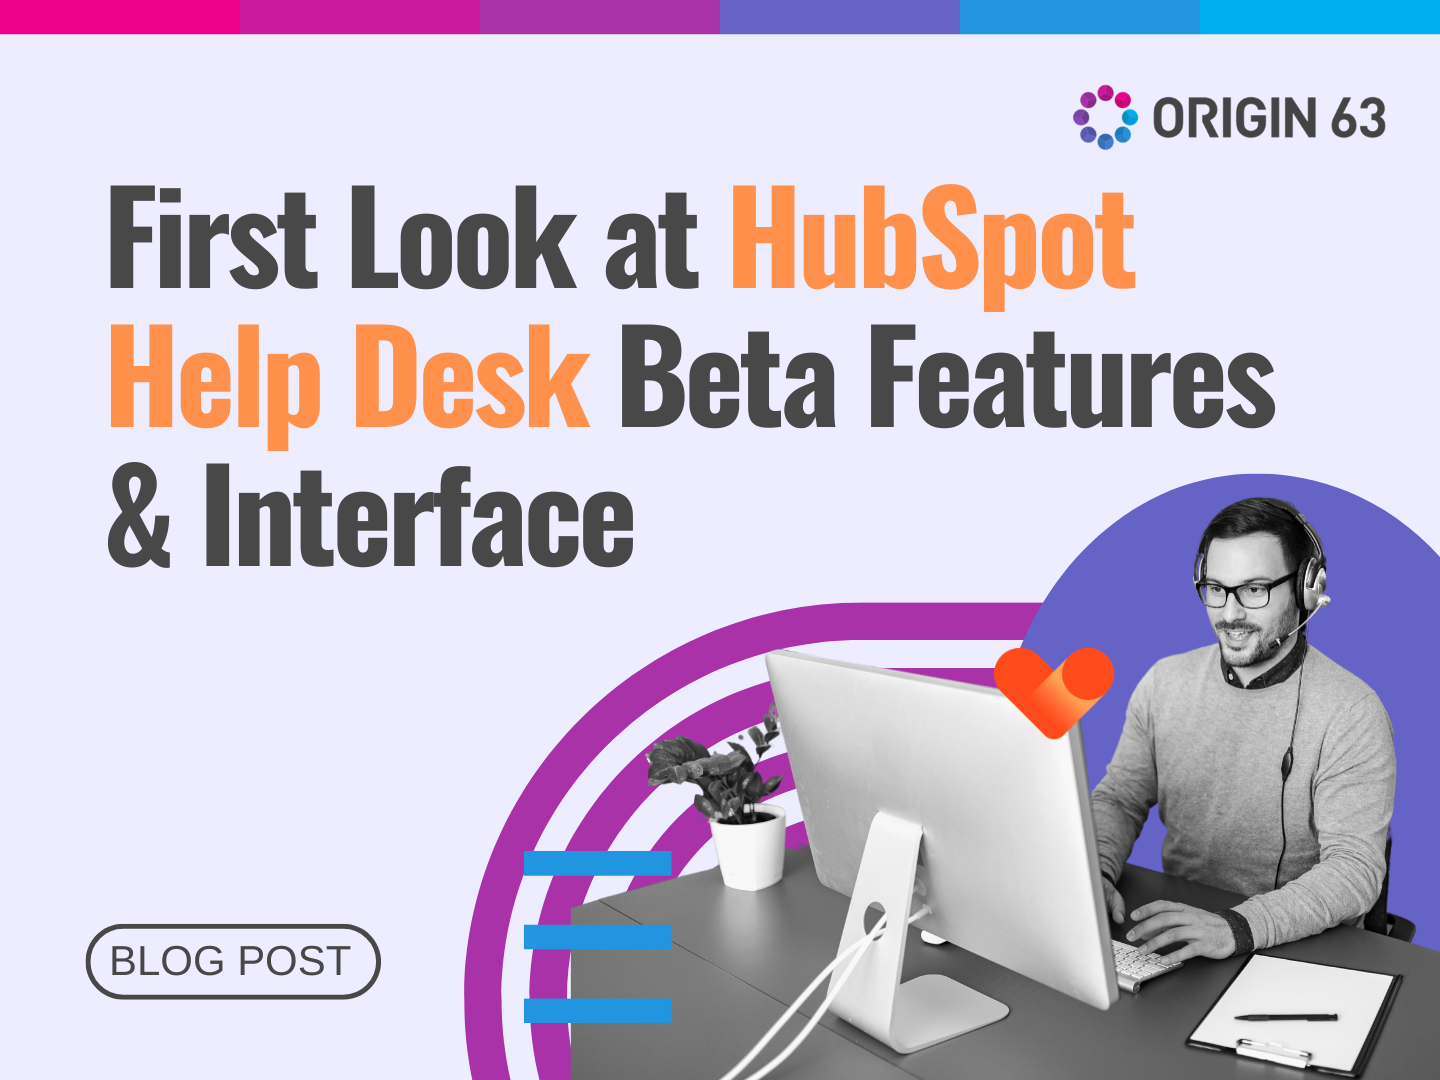 Learn about HubSpot's new Help Desk feature and how it can improve your service with CRM integration and advanced capabilities.